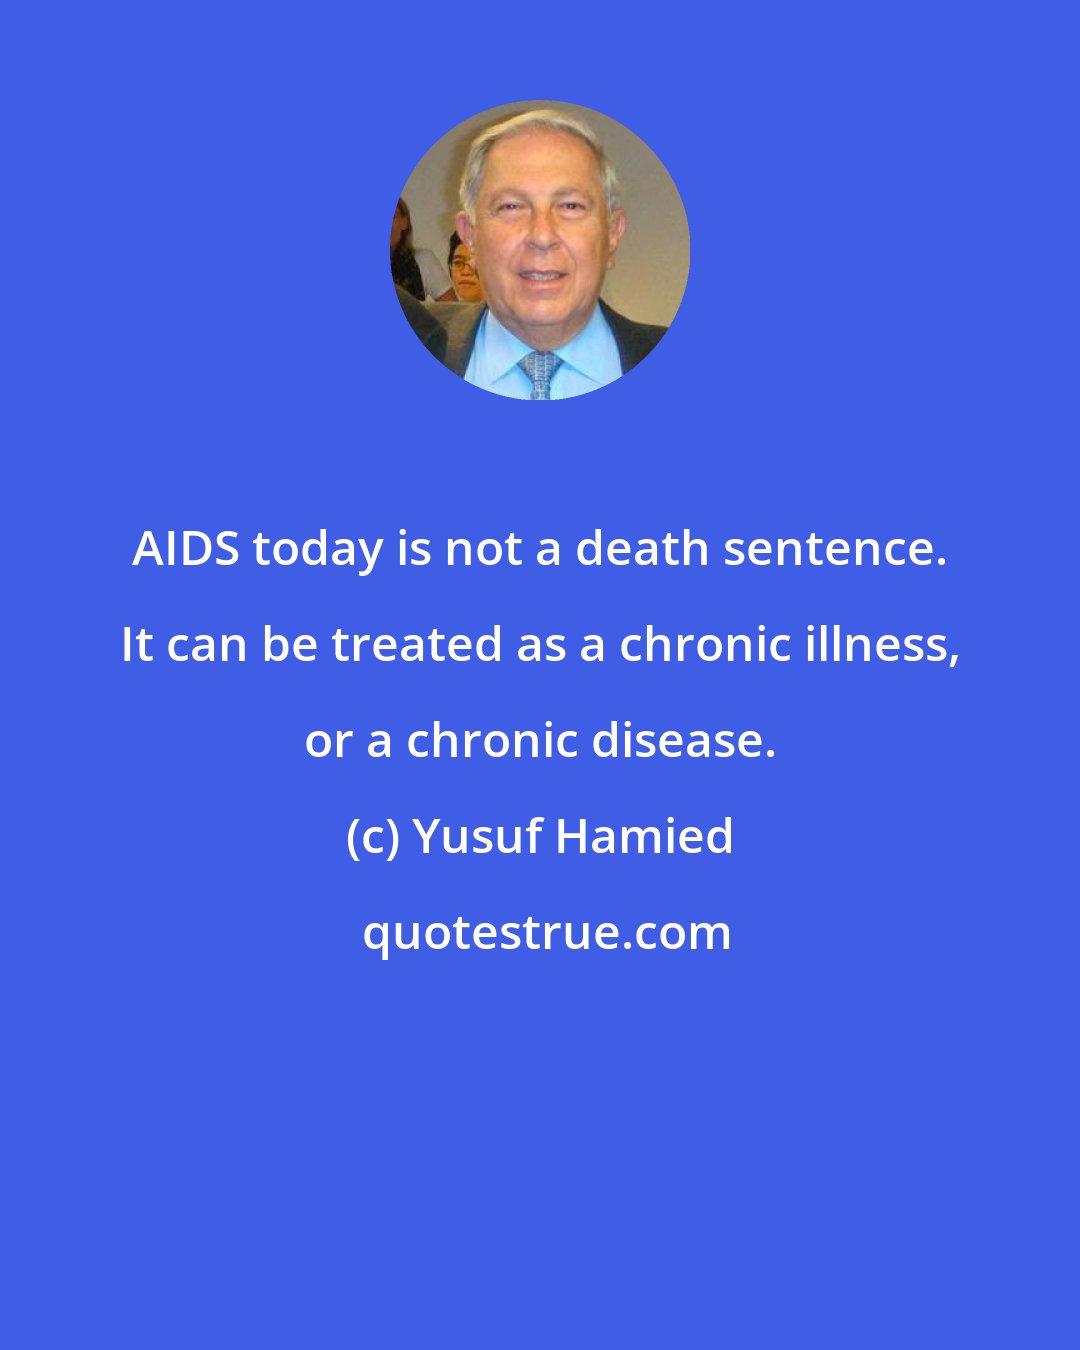 Yusuf Hamied: AIDS today is not a death sentence. It can be treated as a chronic illness, or a chronic disease.